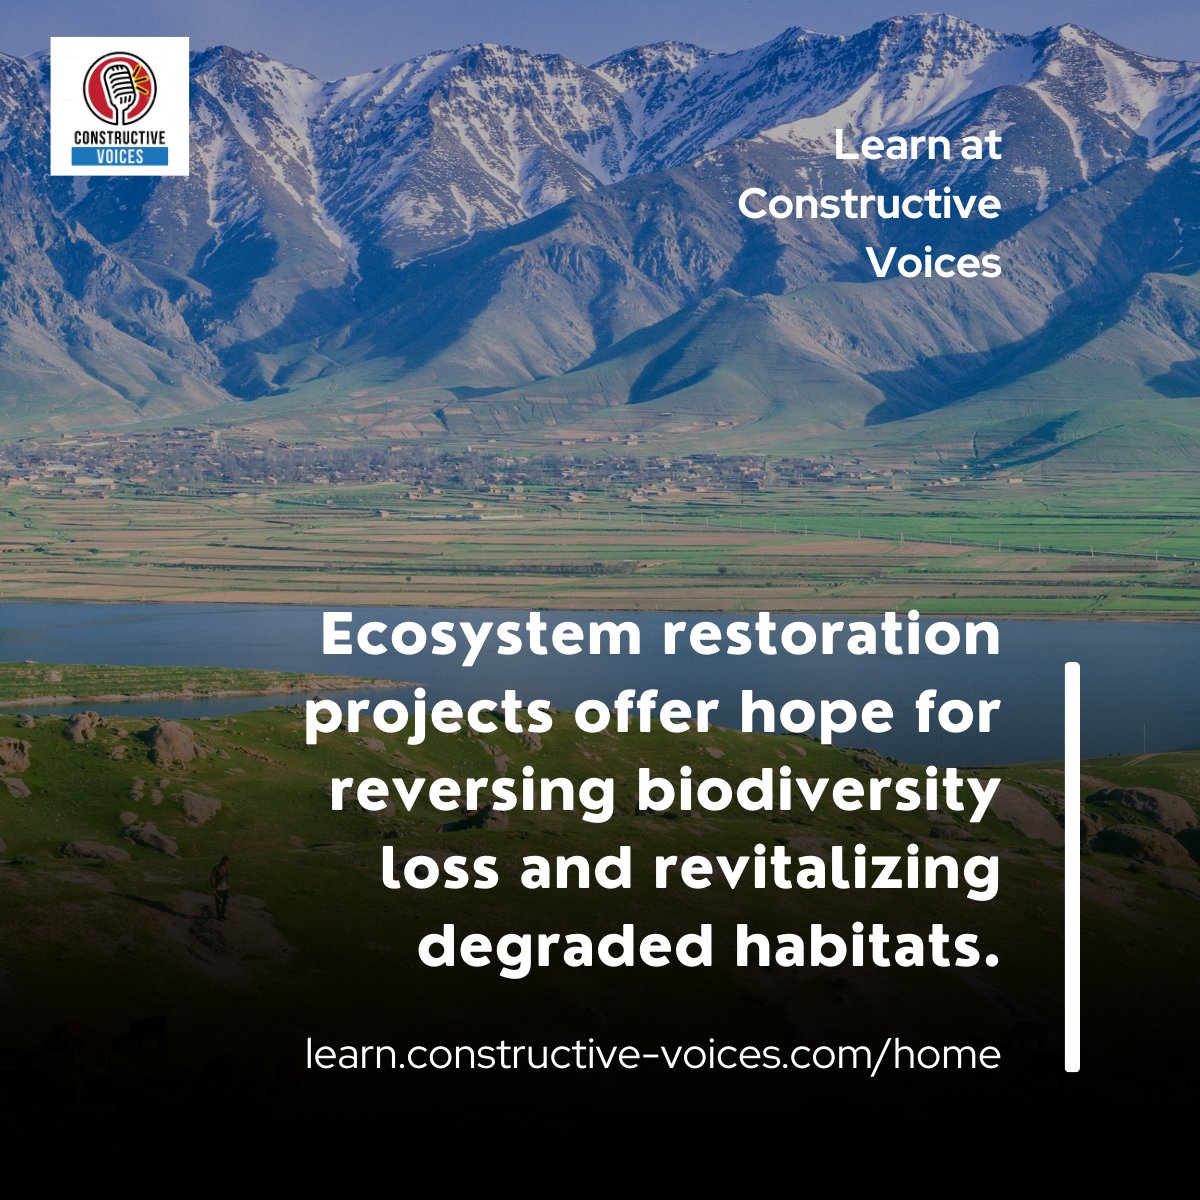 'Ecosystem restoration projects offer hope for reversing biodiversity loss and revitalizing degraded habitats.' #biodiversity #biodiversitynetgain #training - learn.constructive-voices.com/home/